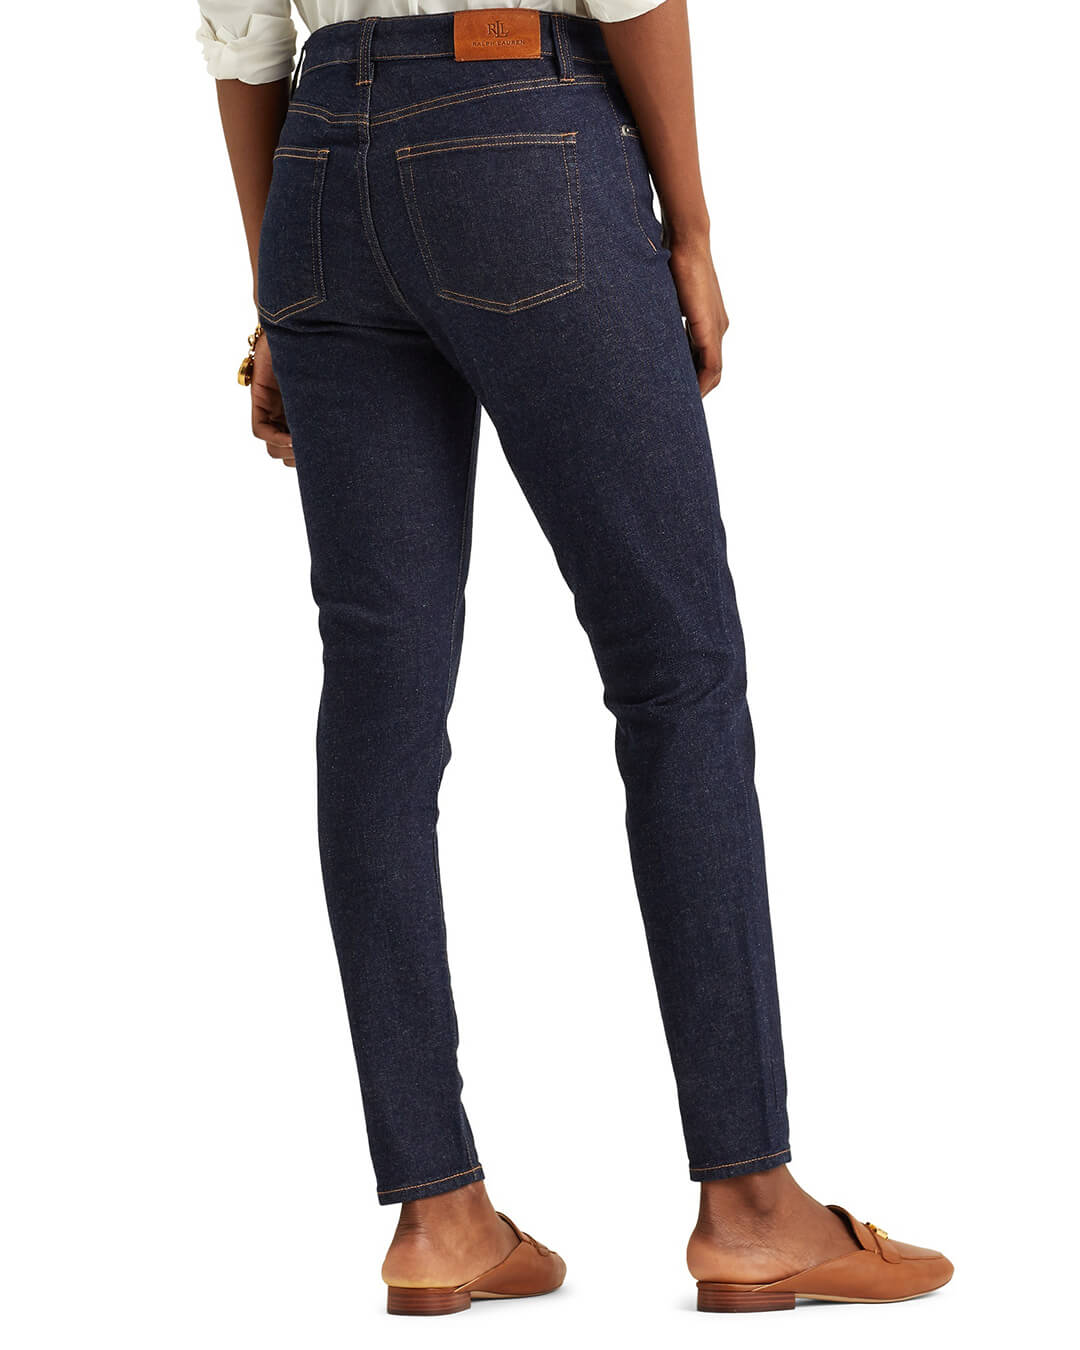 Lauren By Ralph Lauren Jeans Lauren by Ralph Lauren Rinse Wash High-Rise Skinny Ankle Jean